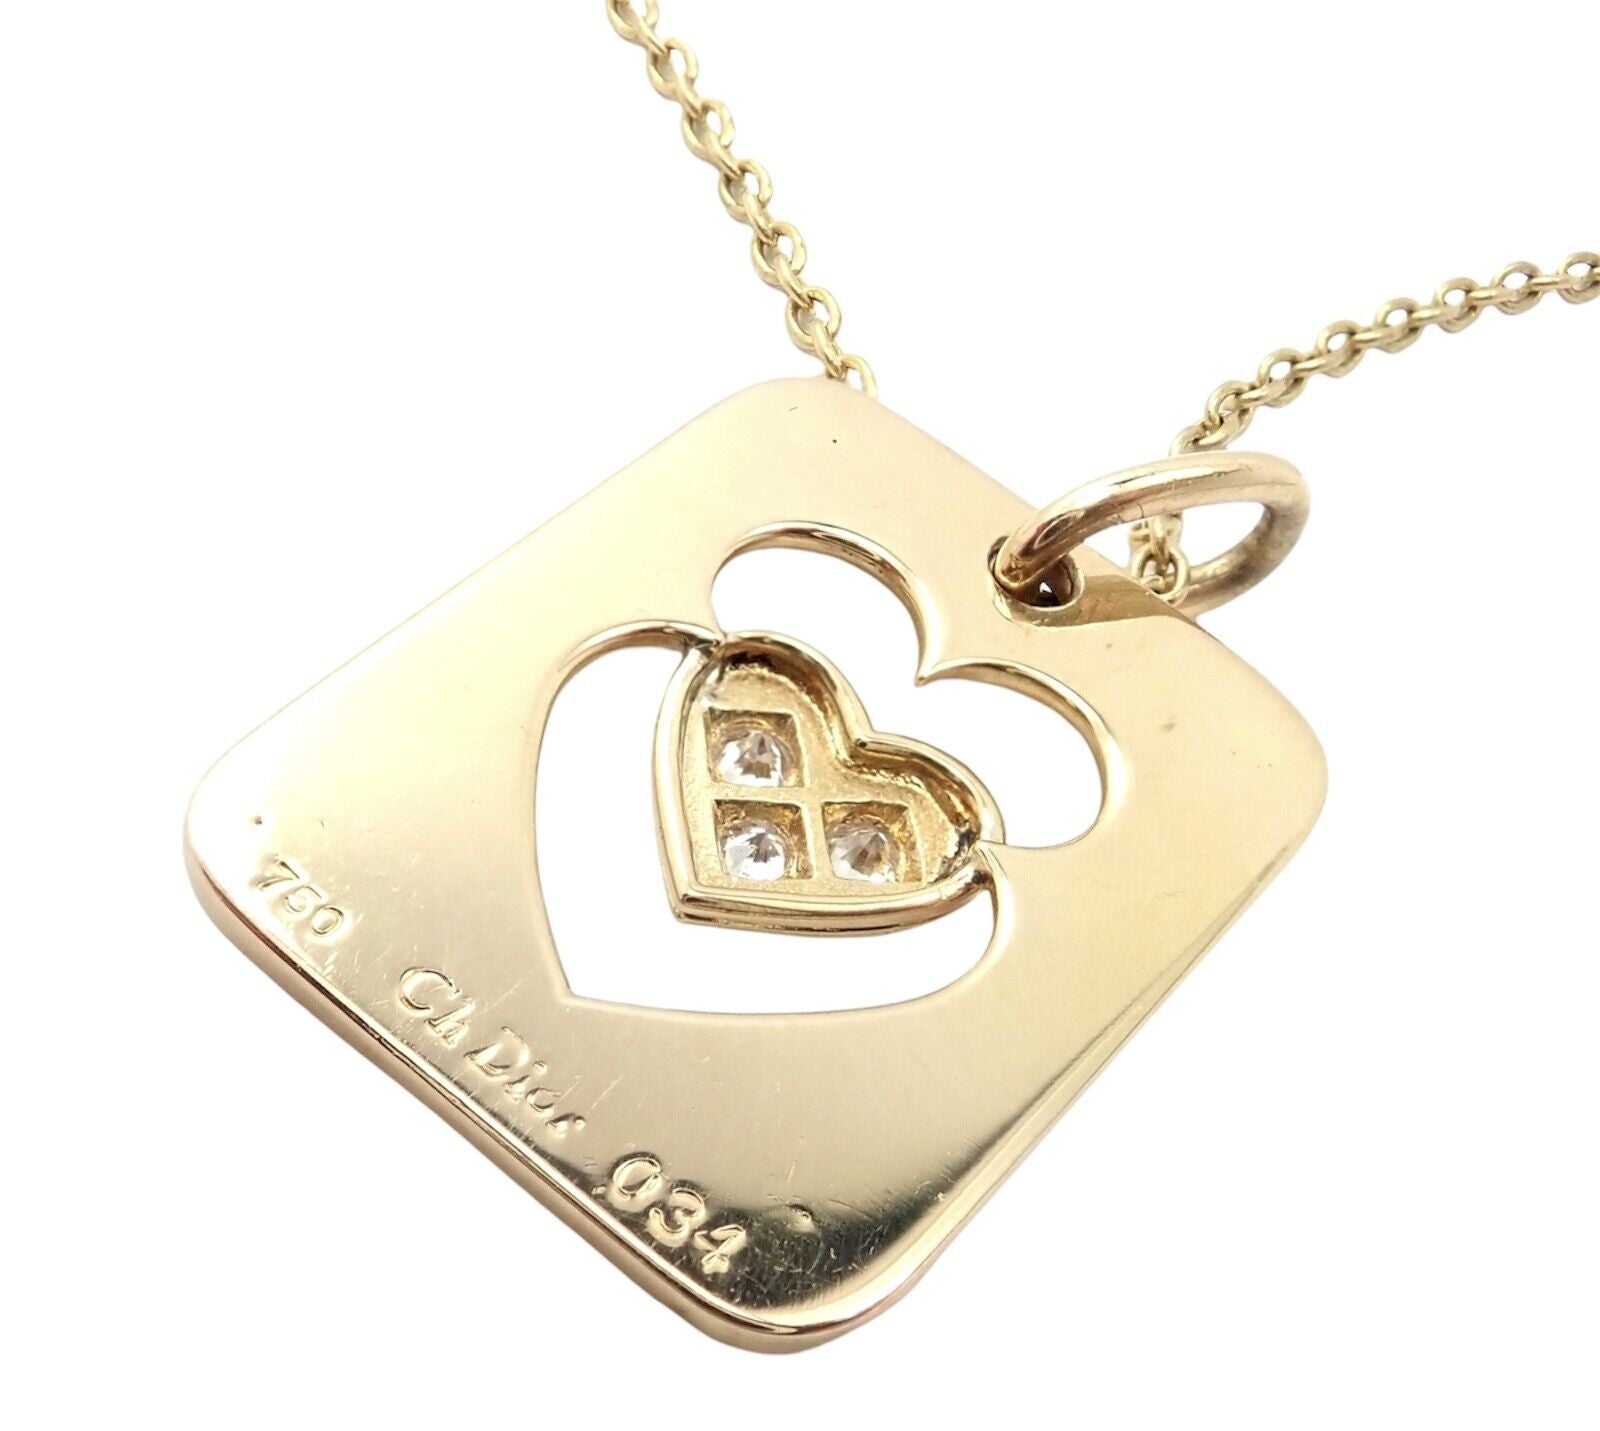 Christian Dior Jewelry & Watches:Fine Jewelry:Necklaces & Pendants Rare! Christian Dior 18k Yellow Gold Diamond Ace Of Hearts Card Pendant Necklace